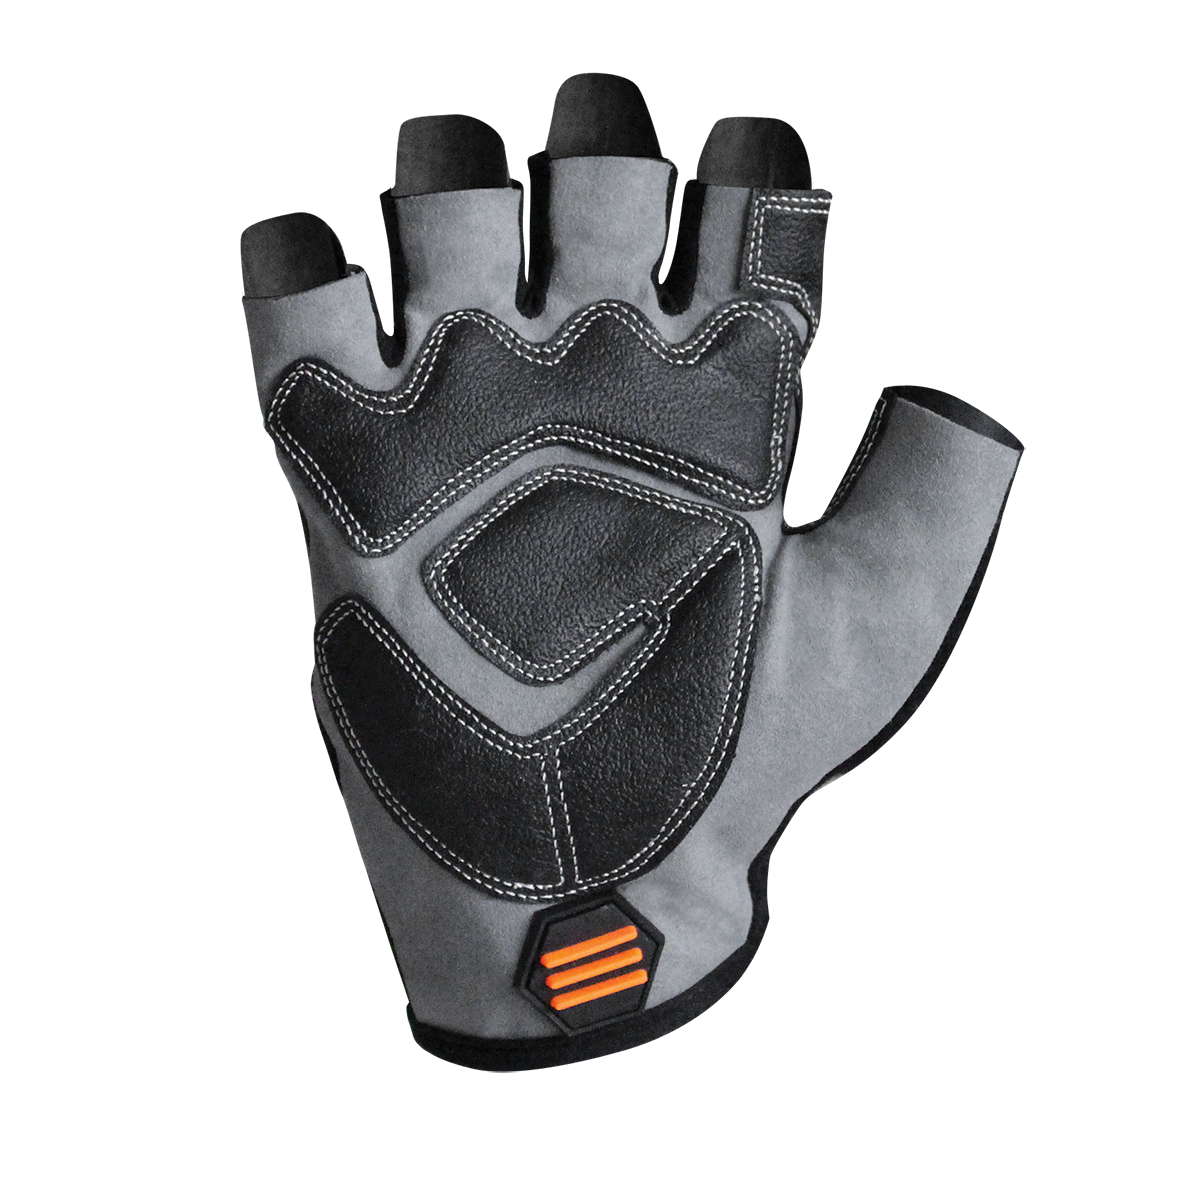 Armour Safety Products Pty Ltd. - Duty Utility Master Glove